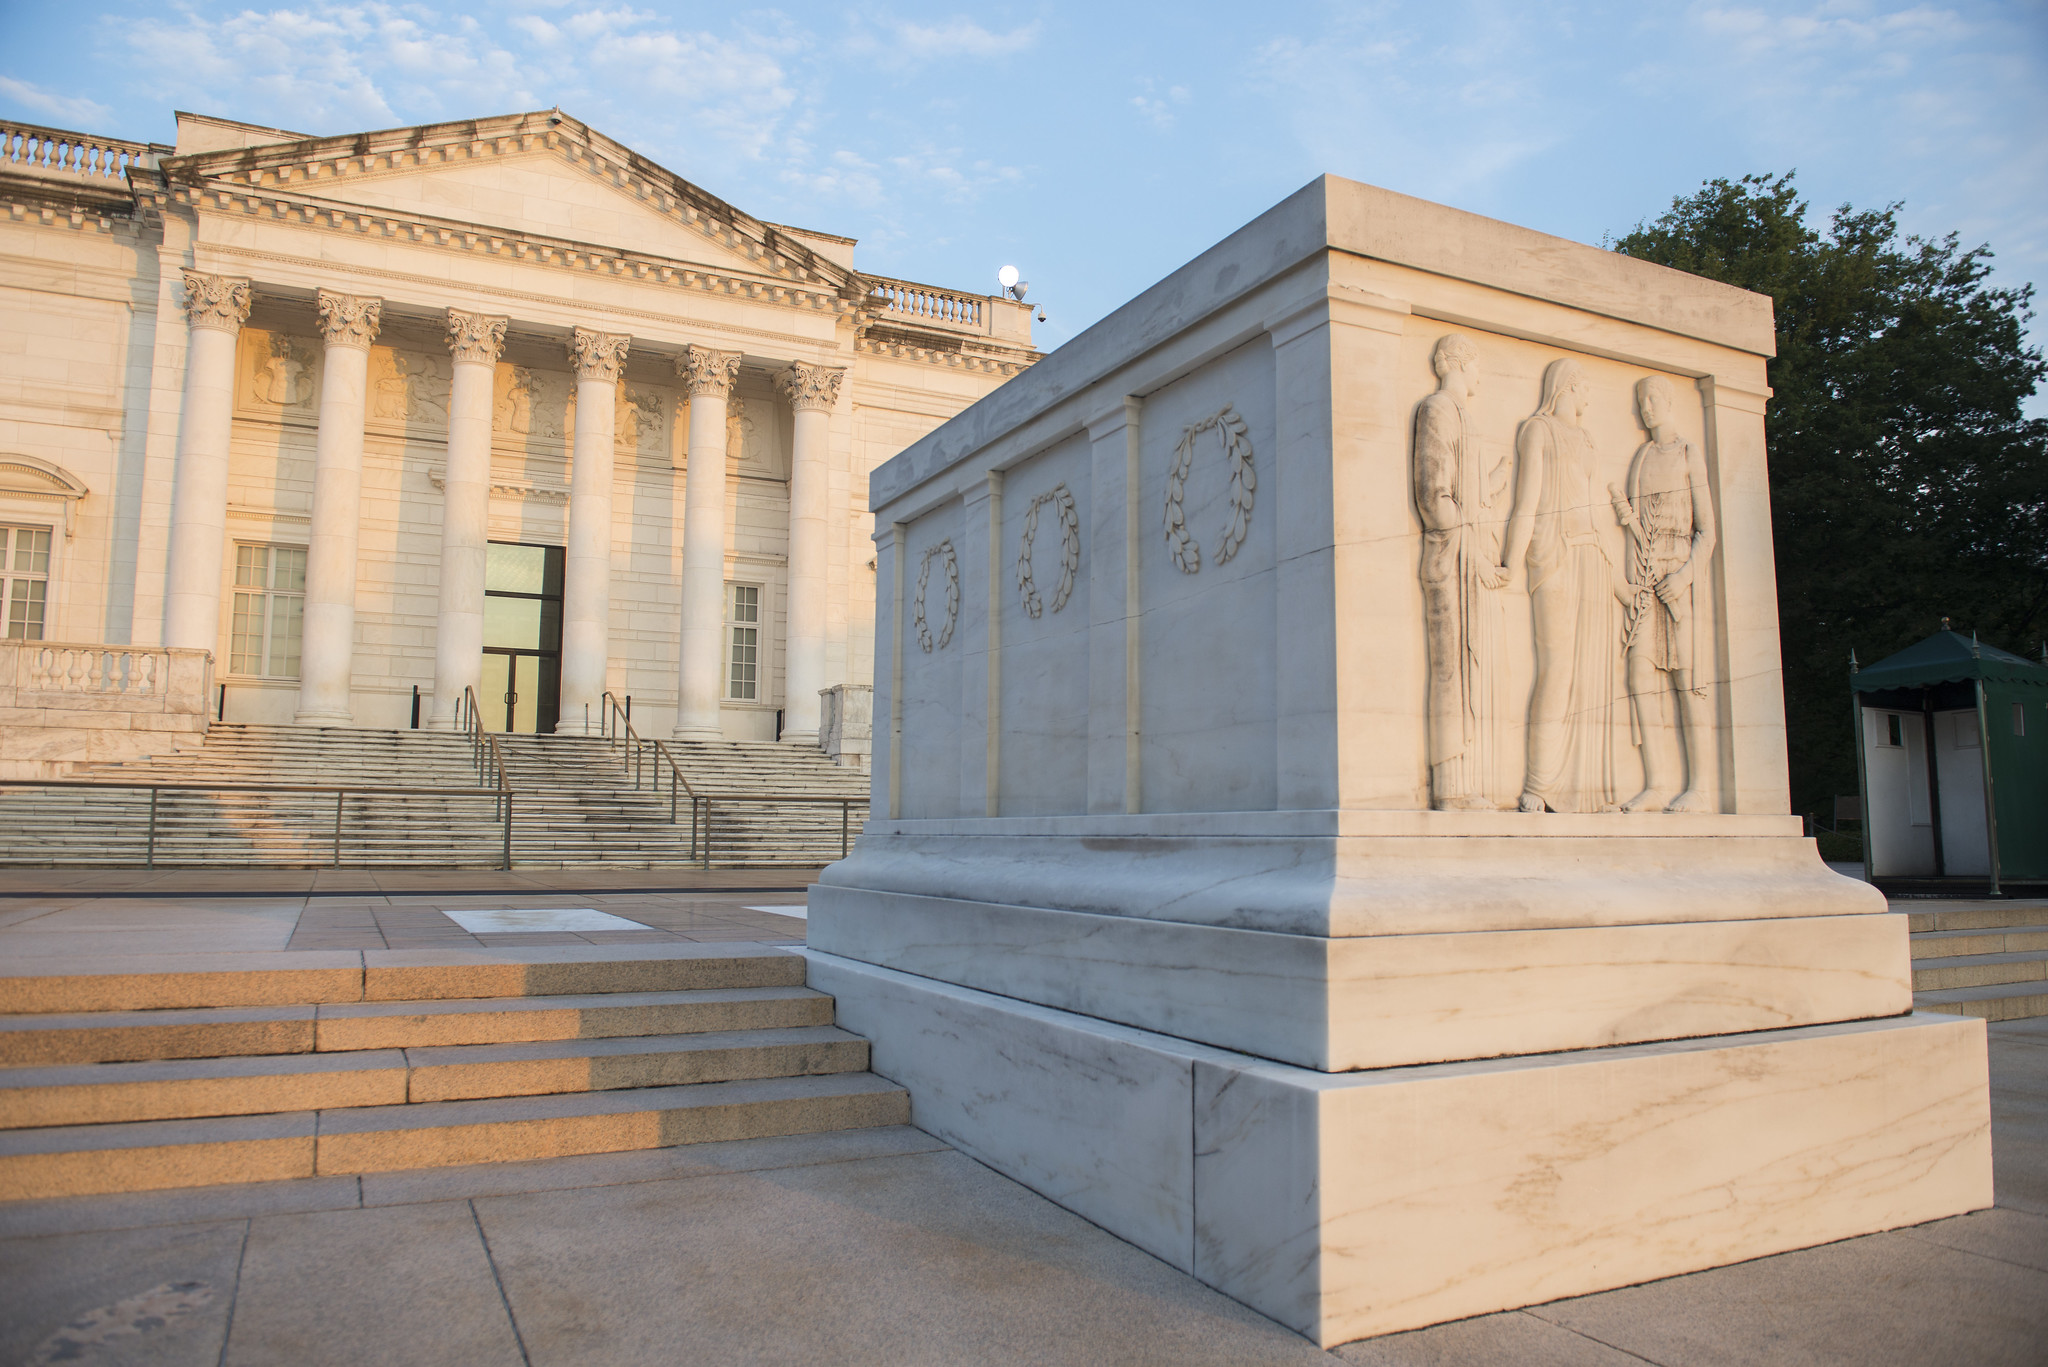 The Tomb of the Unknown Soldier, with carved figures representing Peace, Victory, and Valor